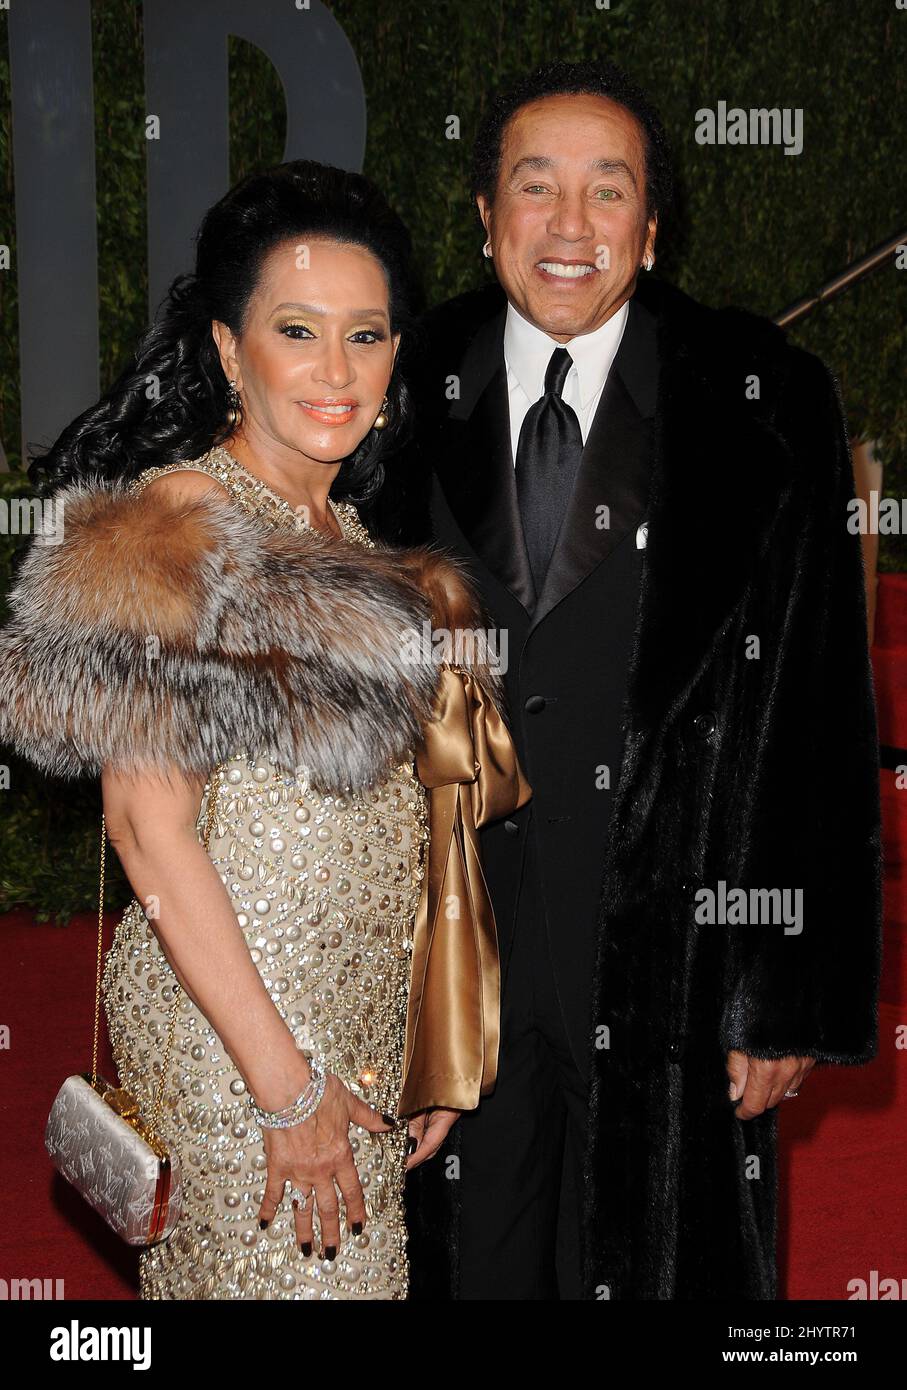 Smokey Robinson and wife Claudette attending the Vanity Fair Oscar Party 2009, held at the Sunset Tower Hotel, Los Angeles. Stock Photo